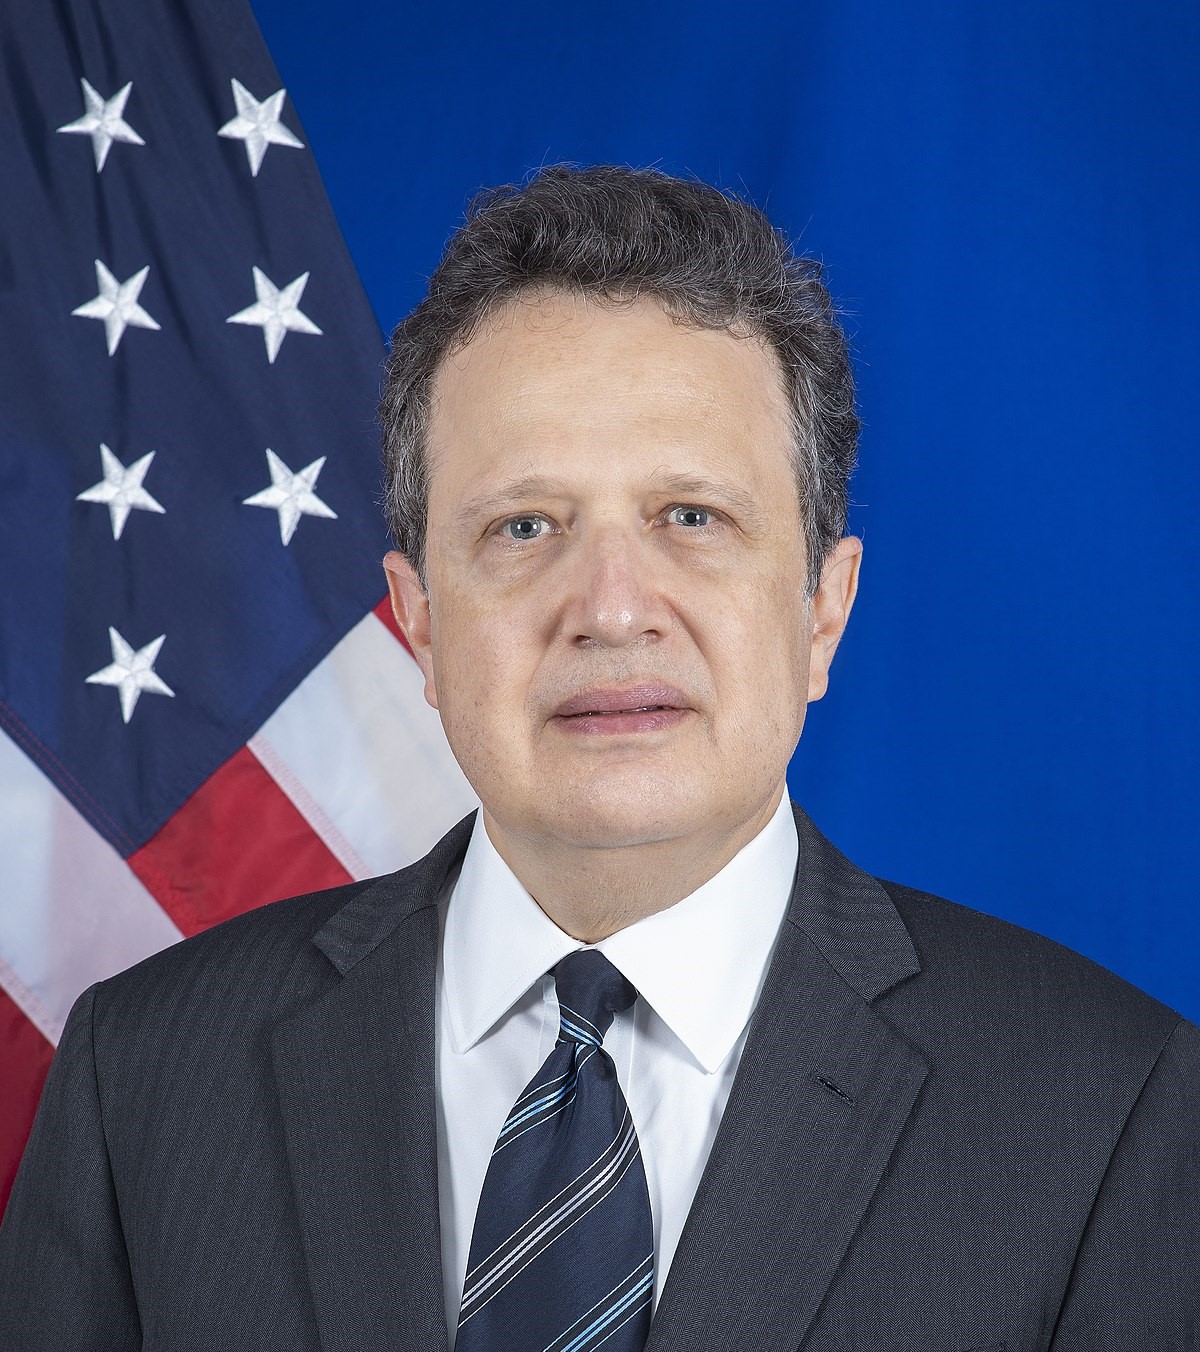 Full speech: U.S. Ambassador to South Sudan Remarks at National Economic Conference